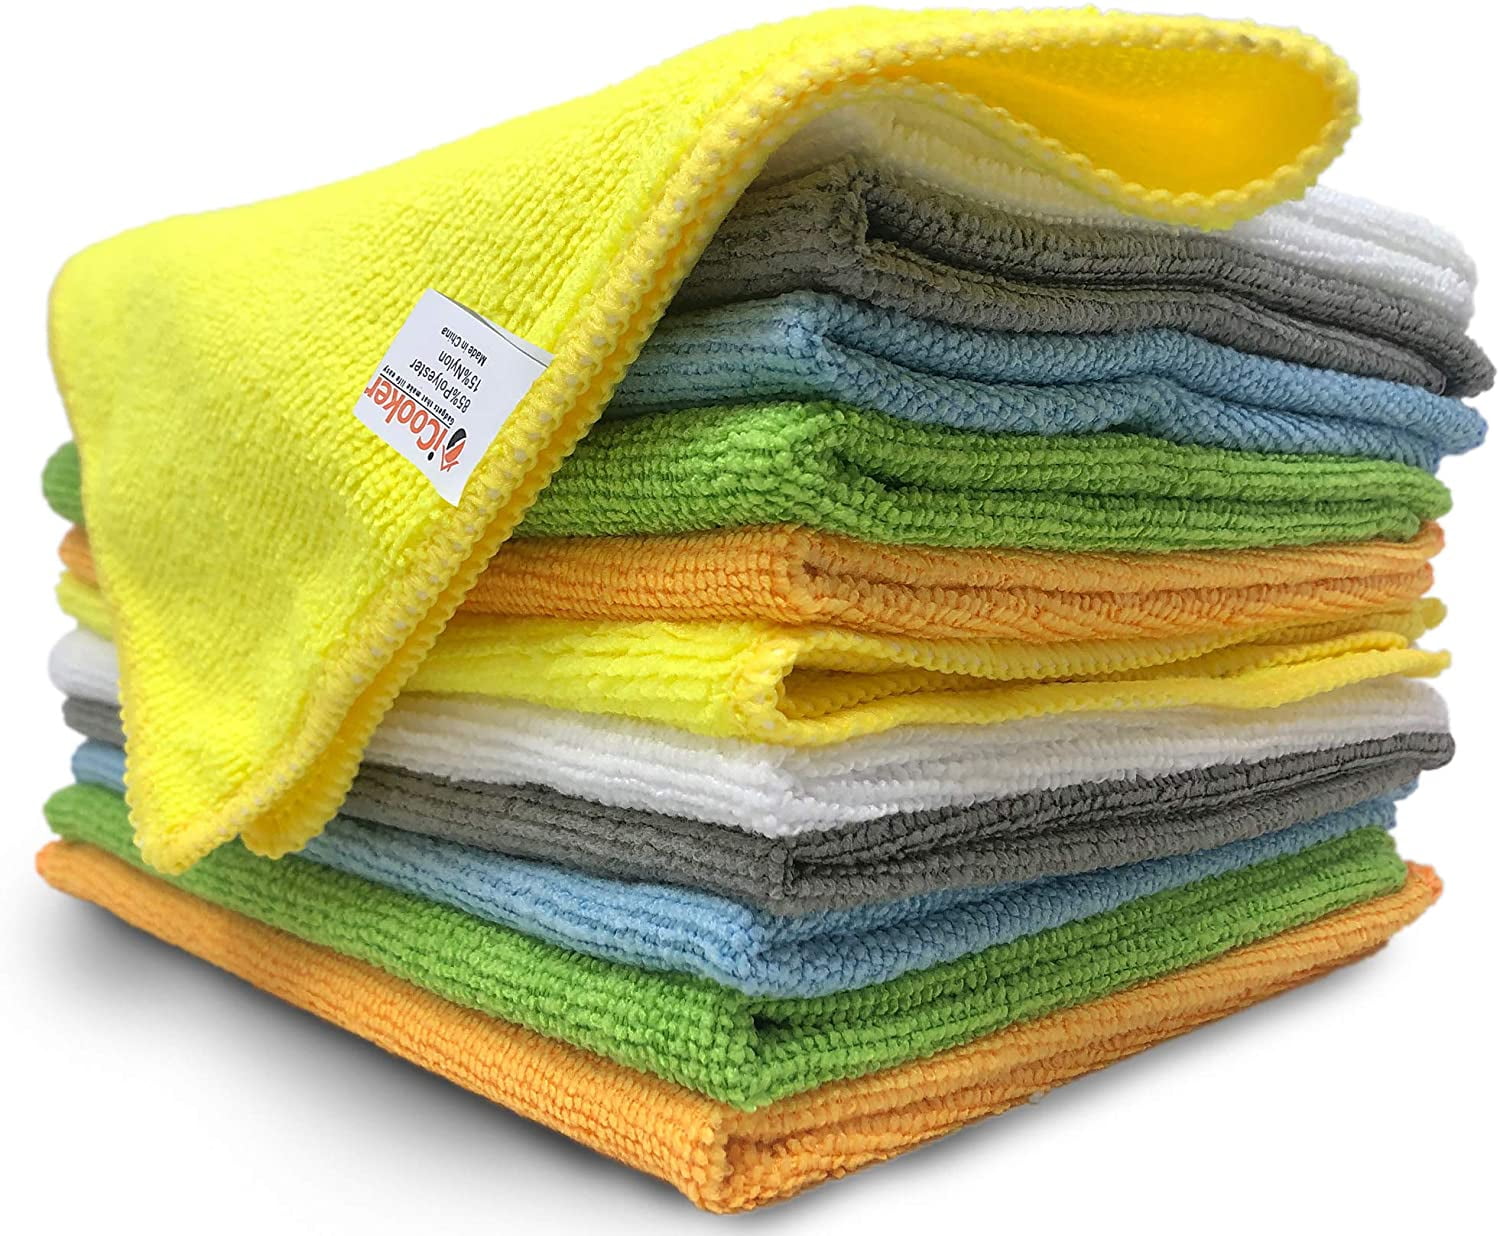 HOMEXCEL Microfiber Cleaning Cloth,100Pack Cleaning Rag,Cleaning Towels with 4 Color Assorted,12X12(Green/Blue/Yellow/Pink)